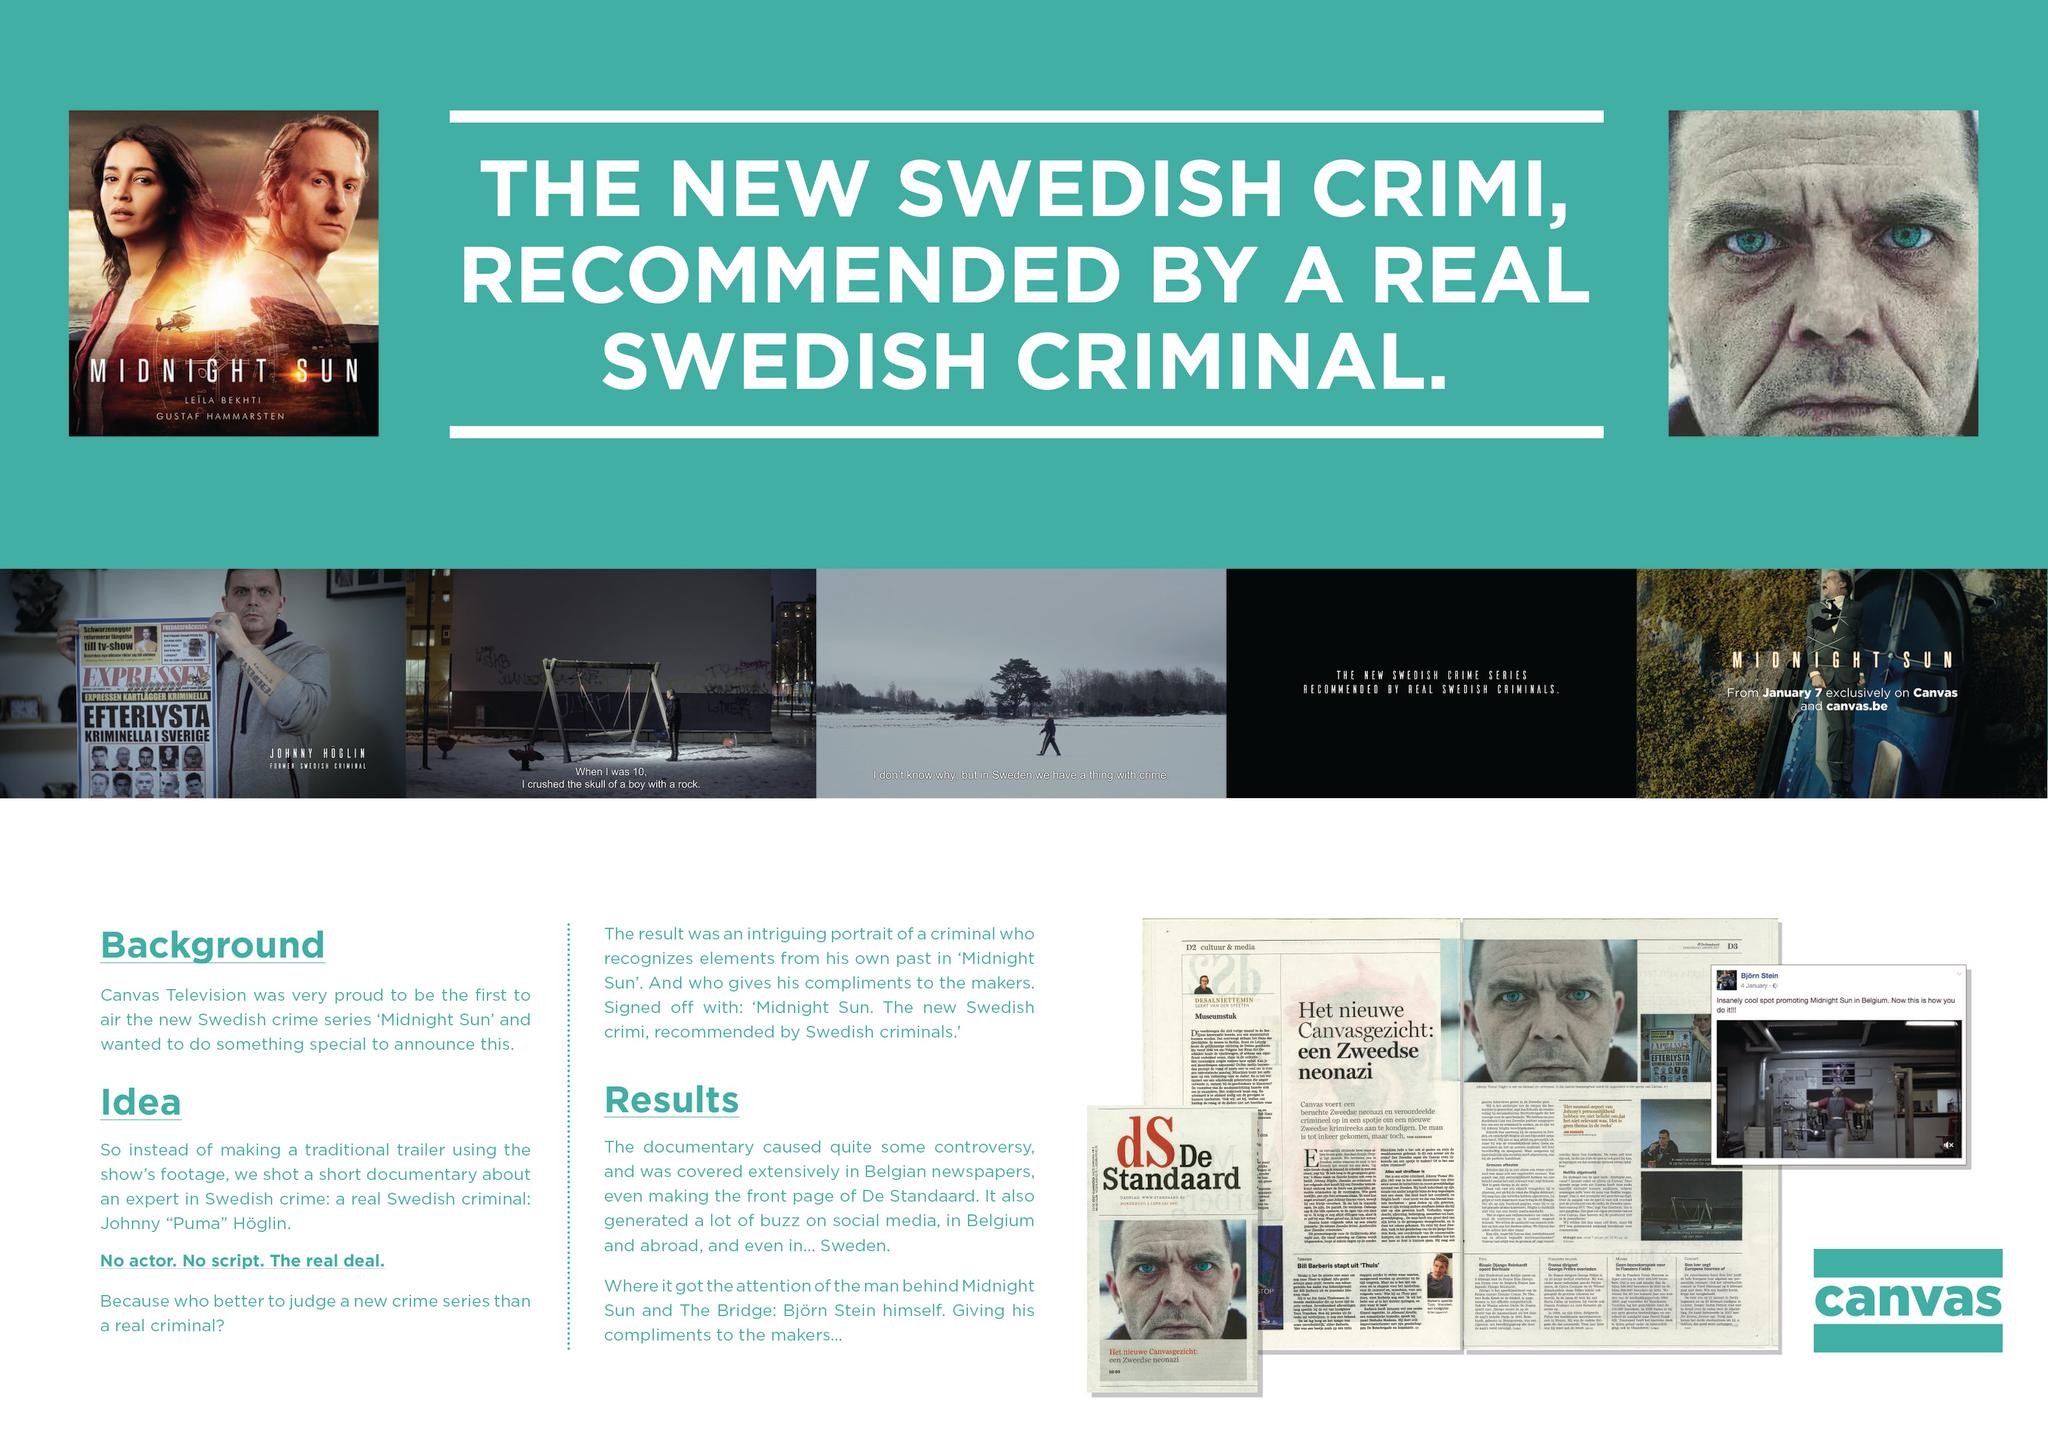 Midnight Sun recommended by a real Swedish criminal